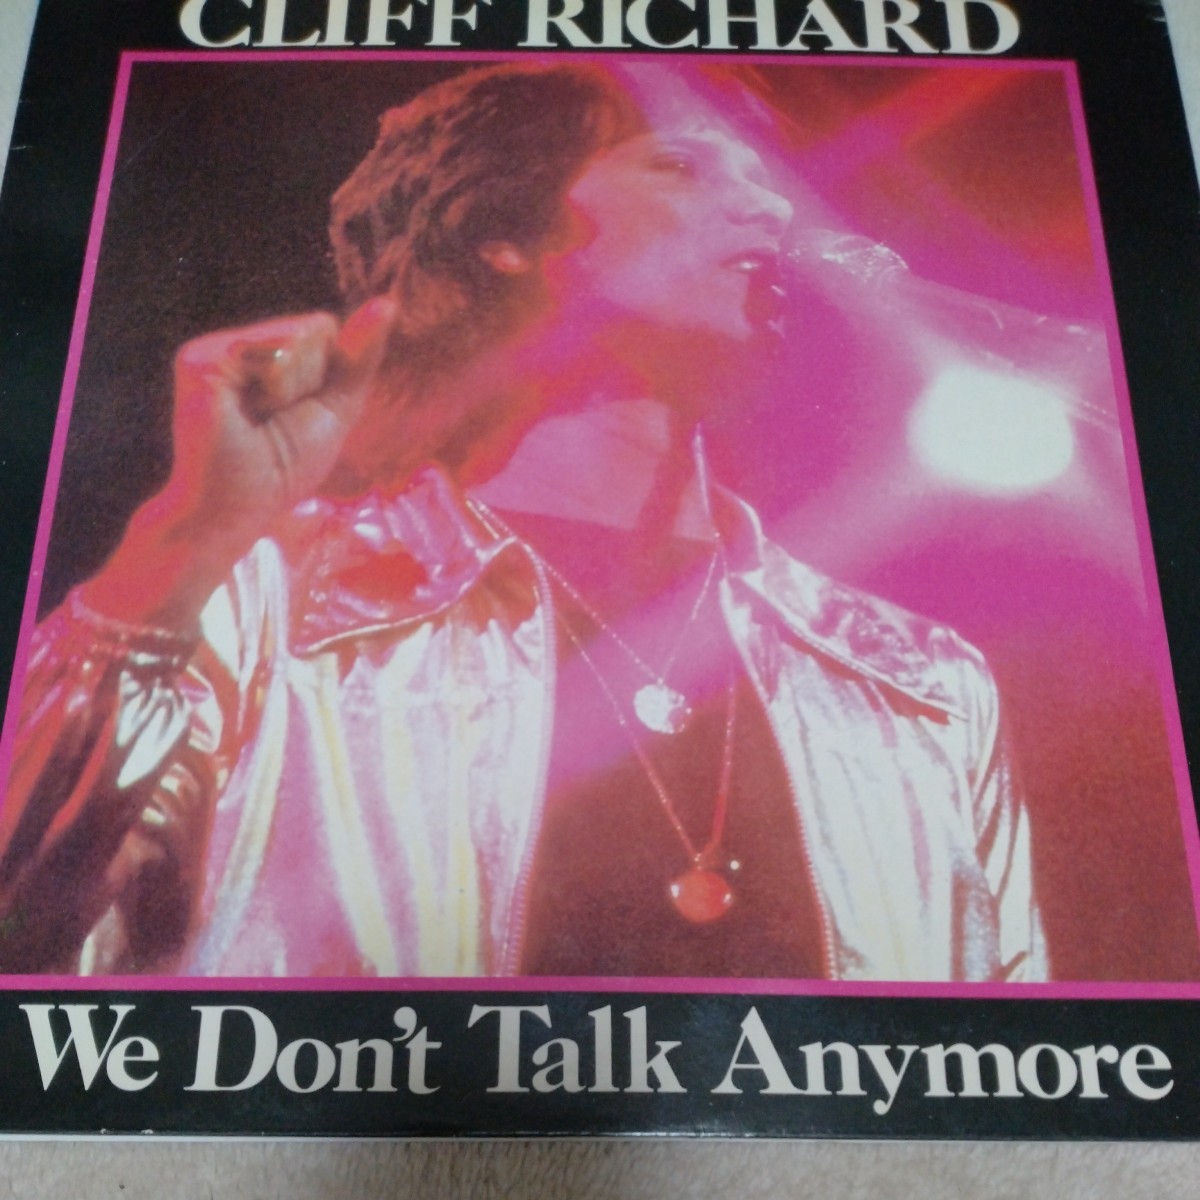 12inch Single CLIFF RICHARD/We Don't Talk Anymore c/w Count Me Out HOLLAND EMI 1A K052Z-07076 1979年発売 大ヒット曲_画像1